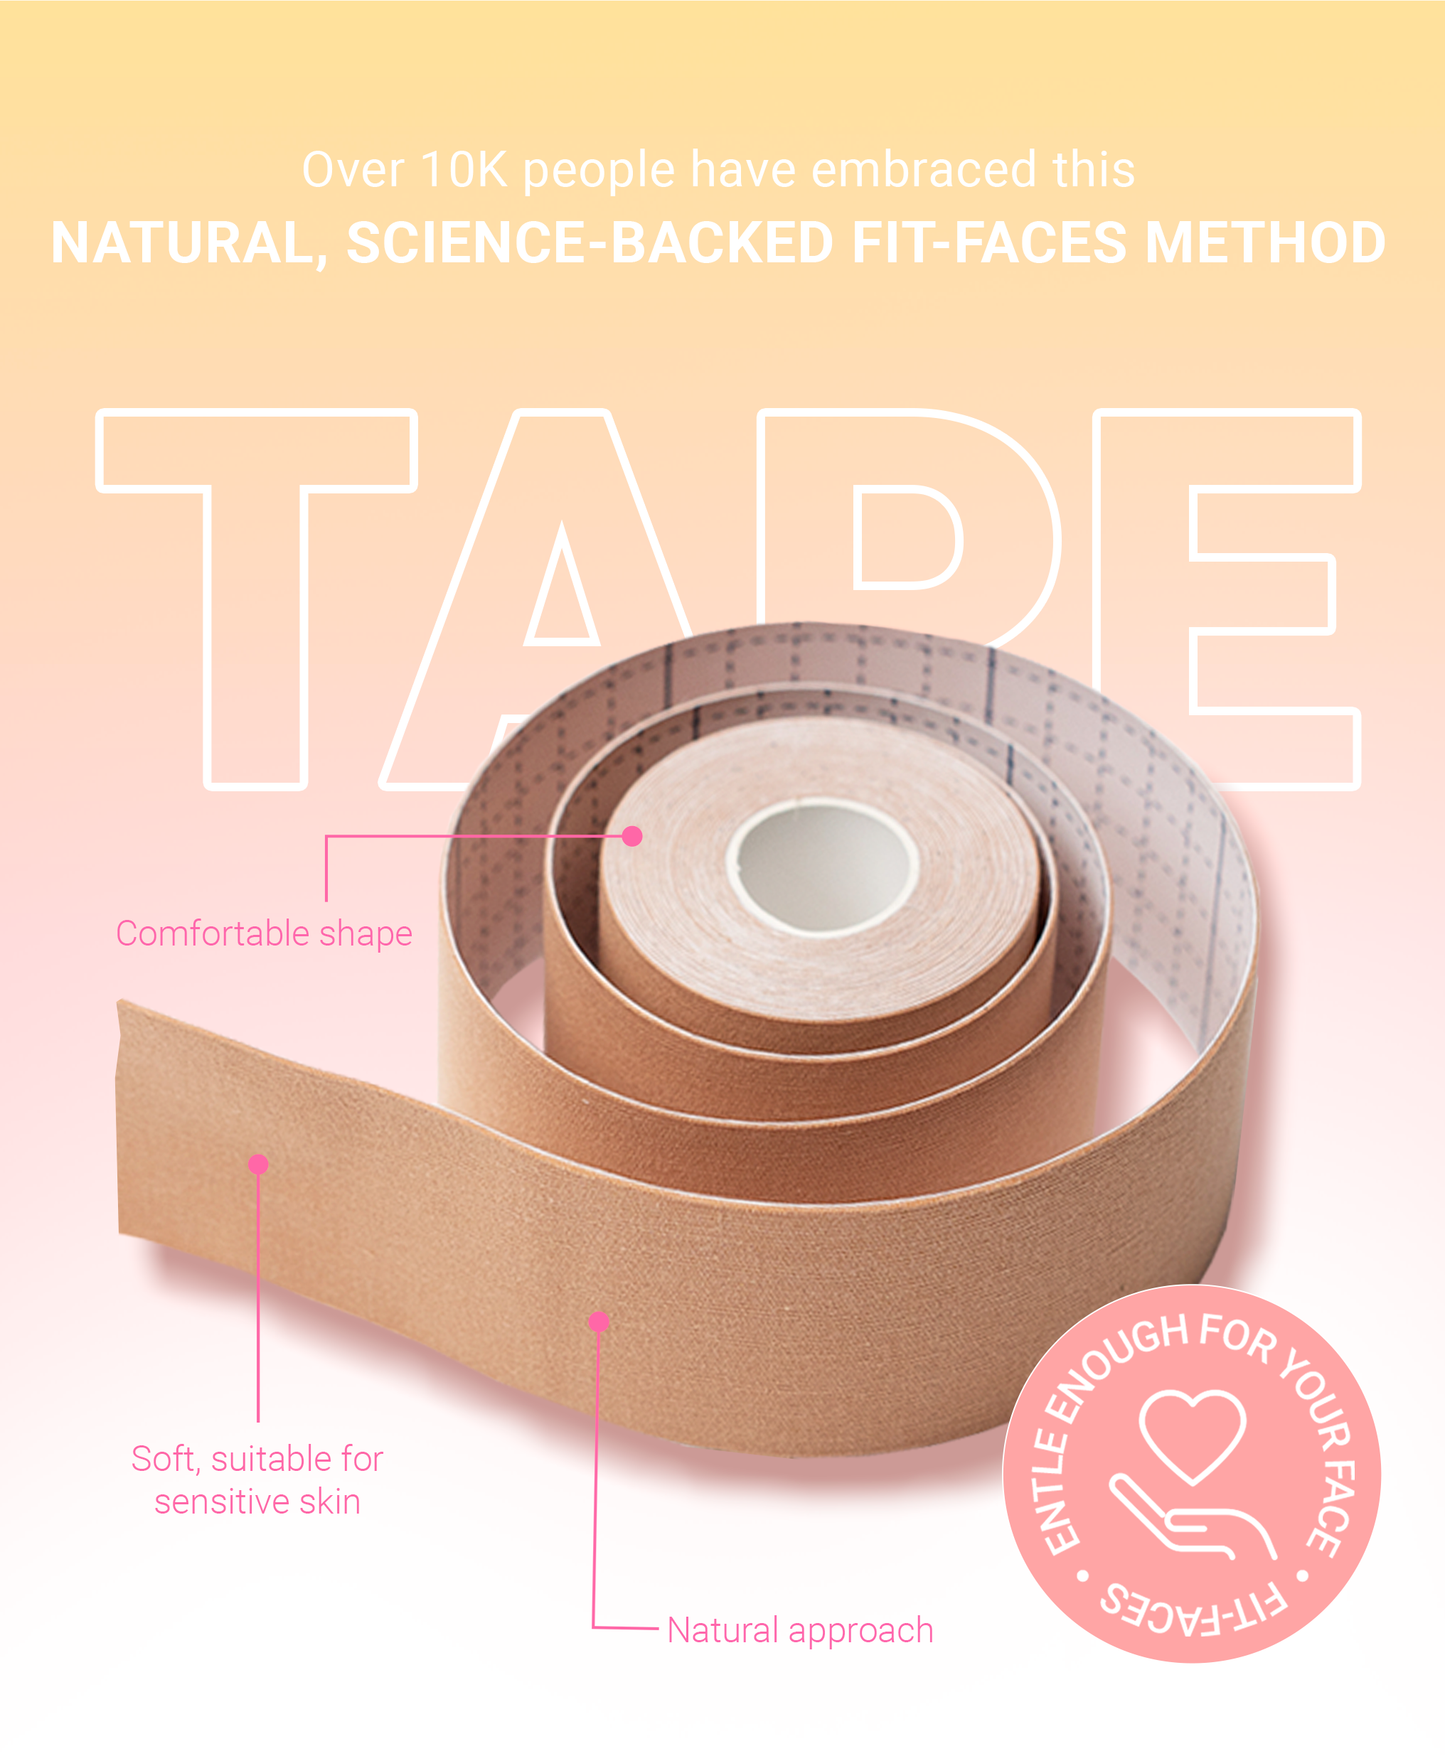 FIT-FACES FACIAL KINESIO TAPE + COURSE